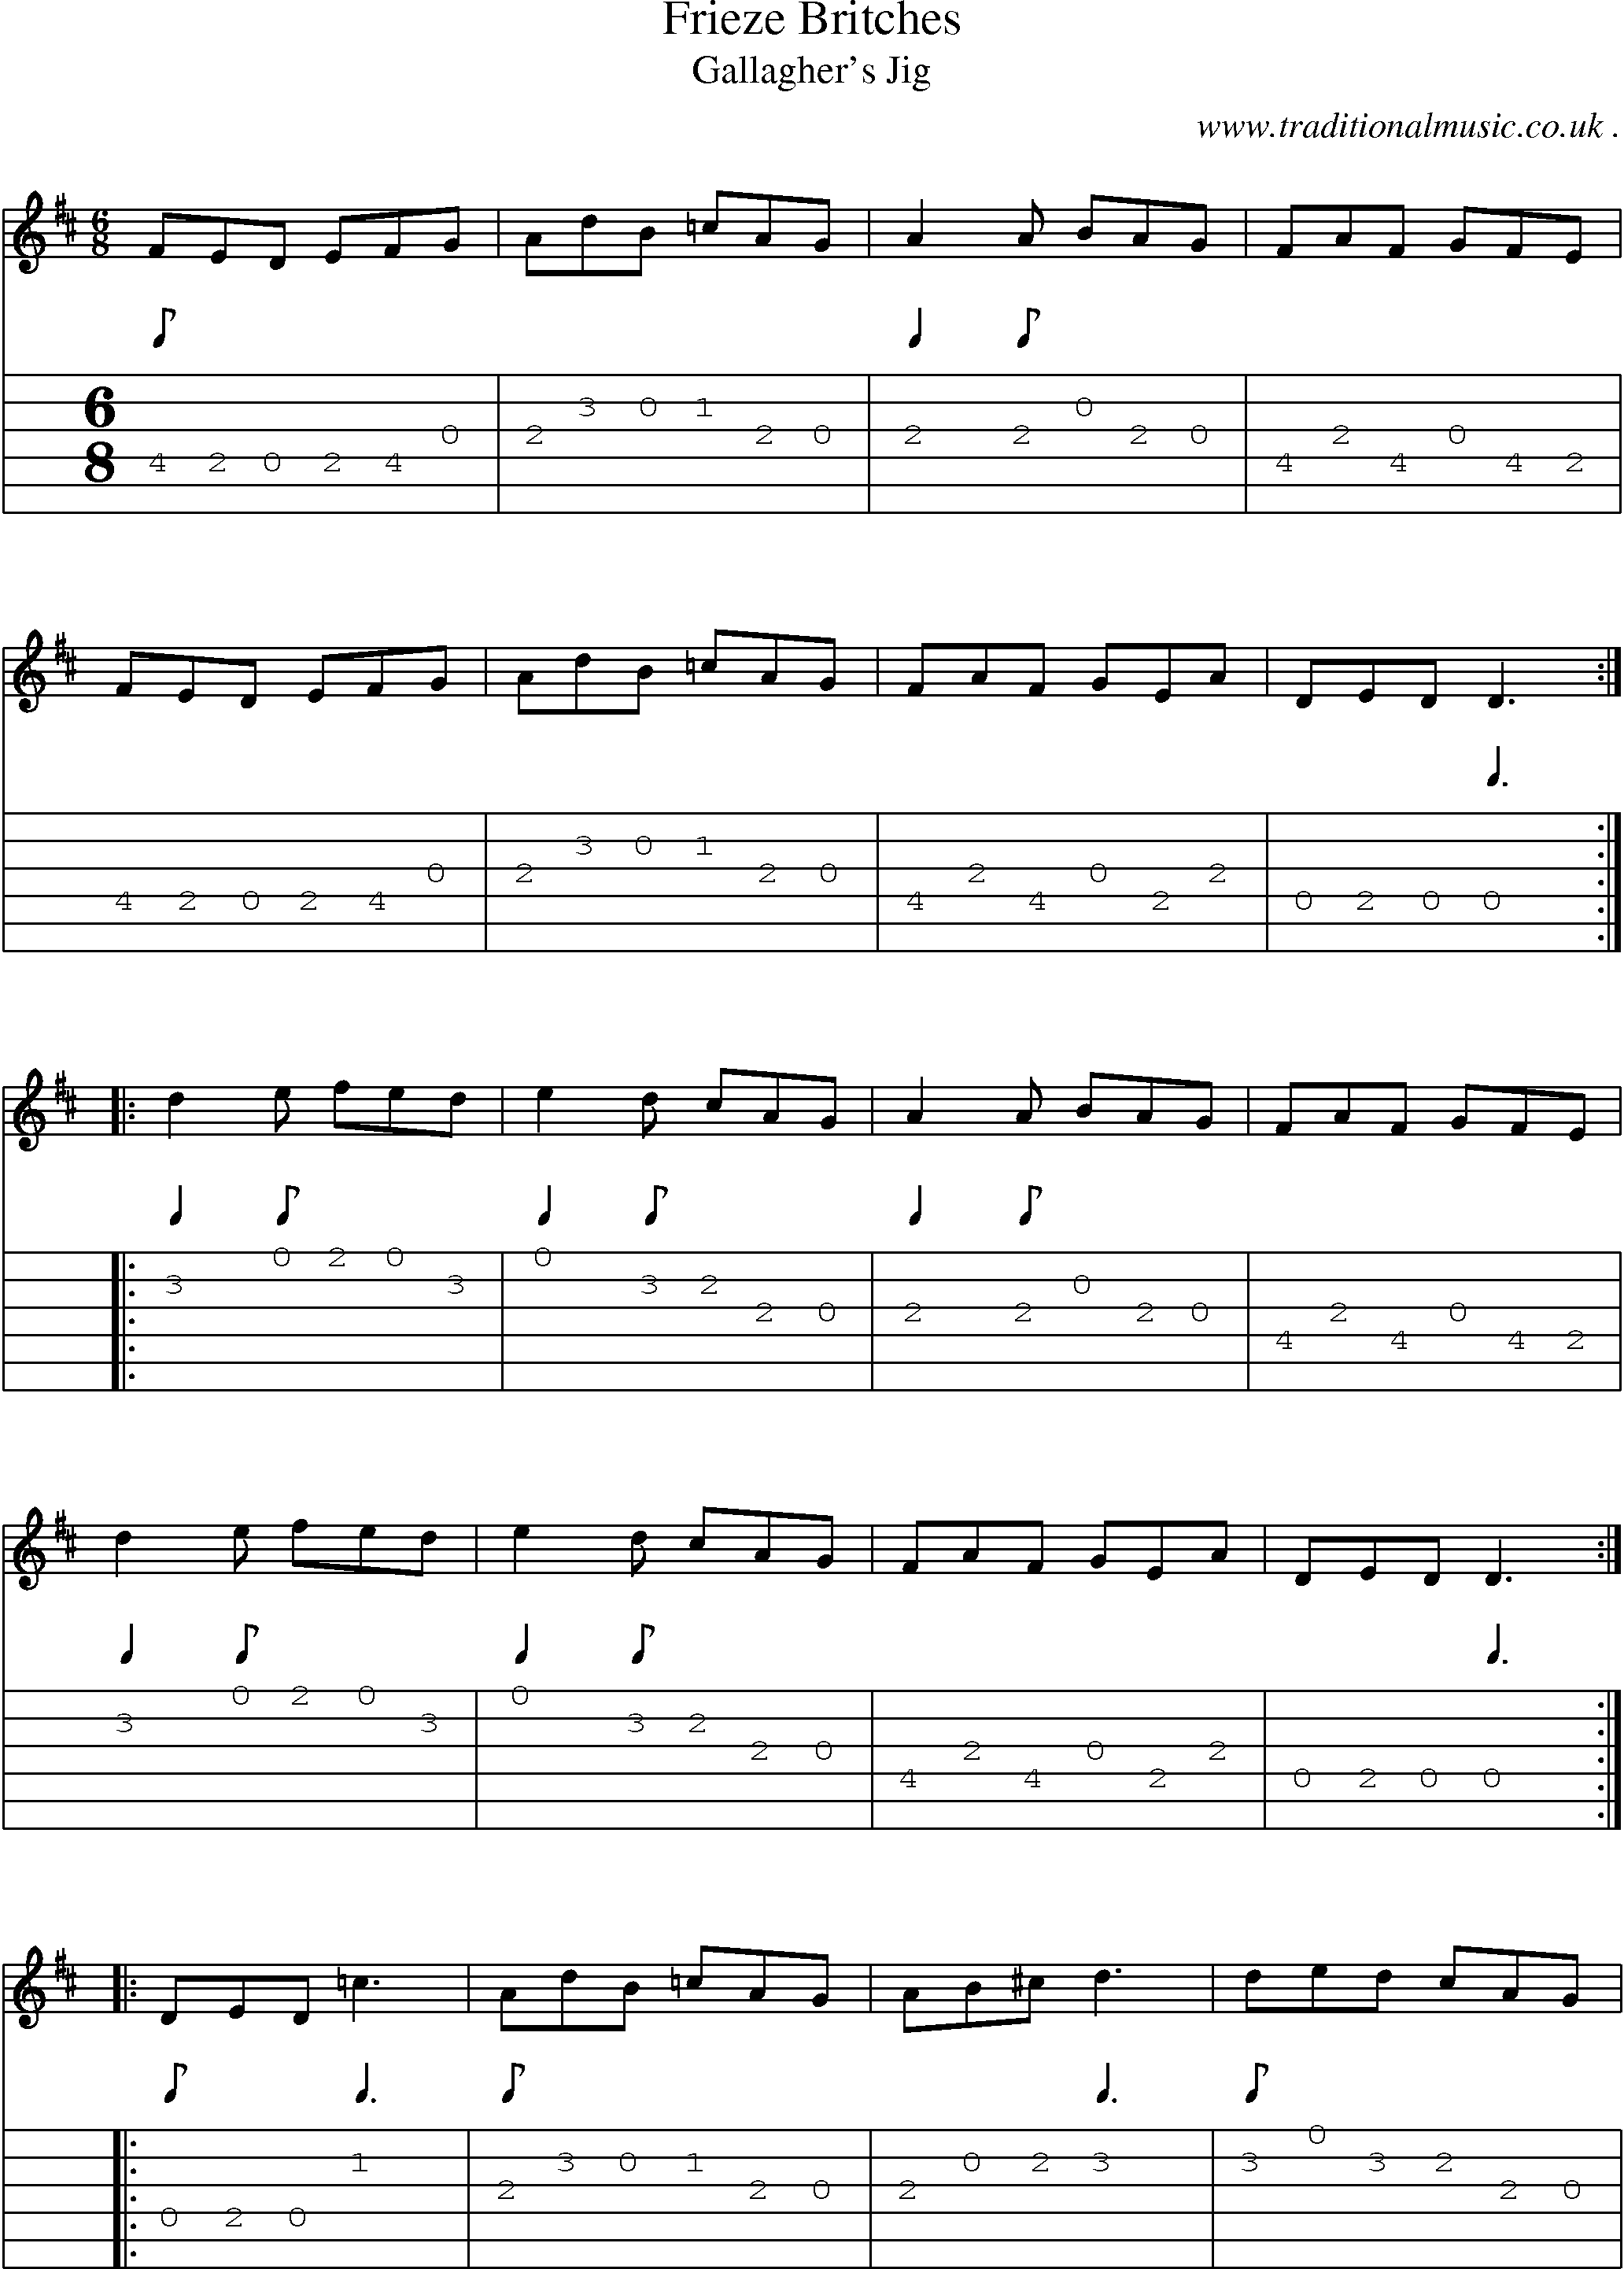 Sheet-Music and Guitar Tabs for Frieze Britches